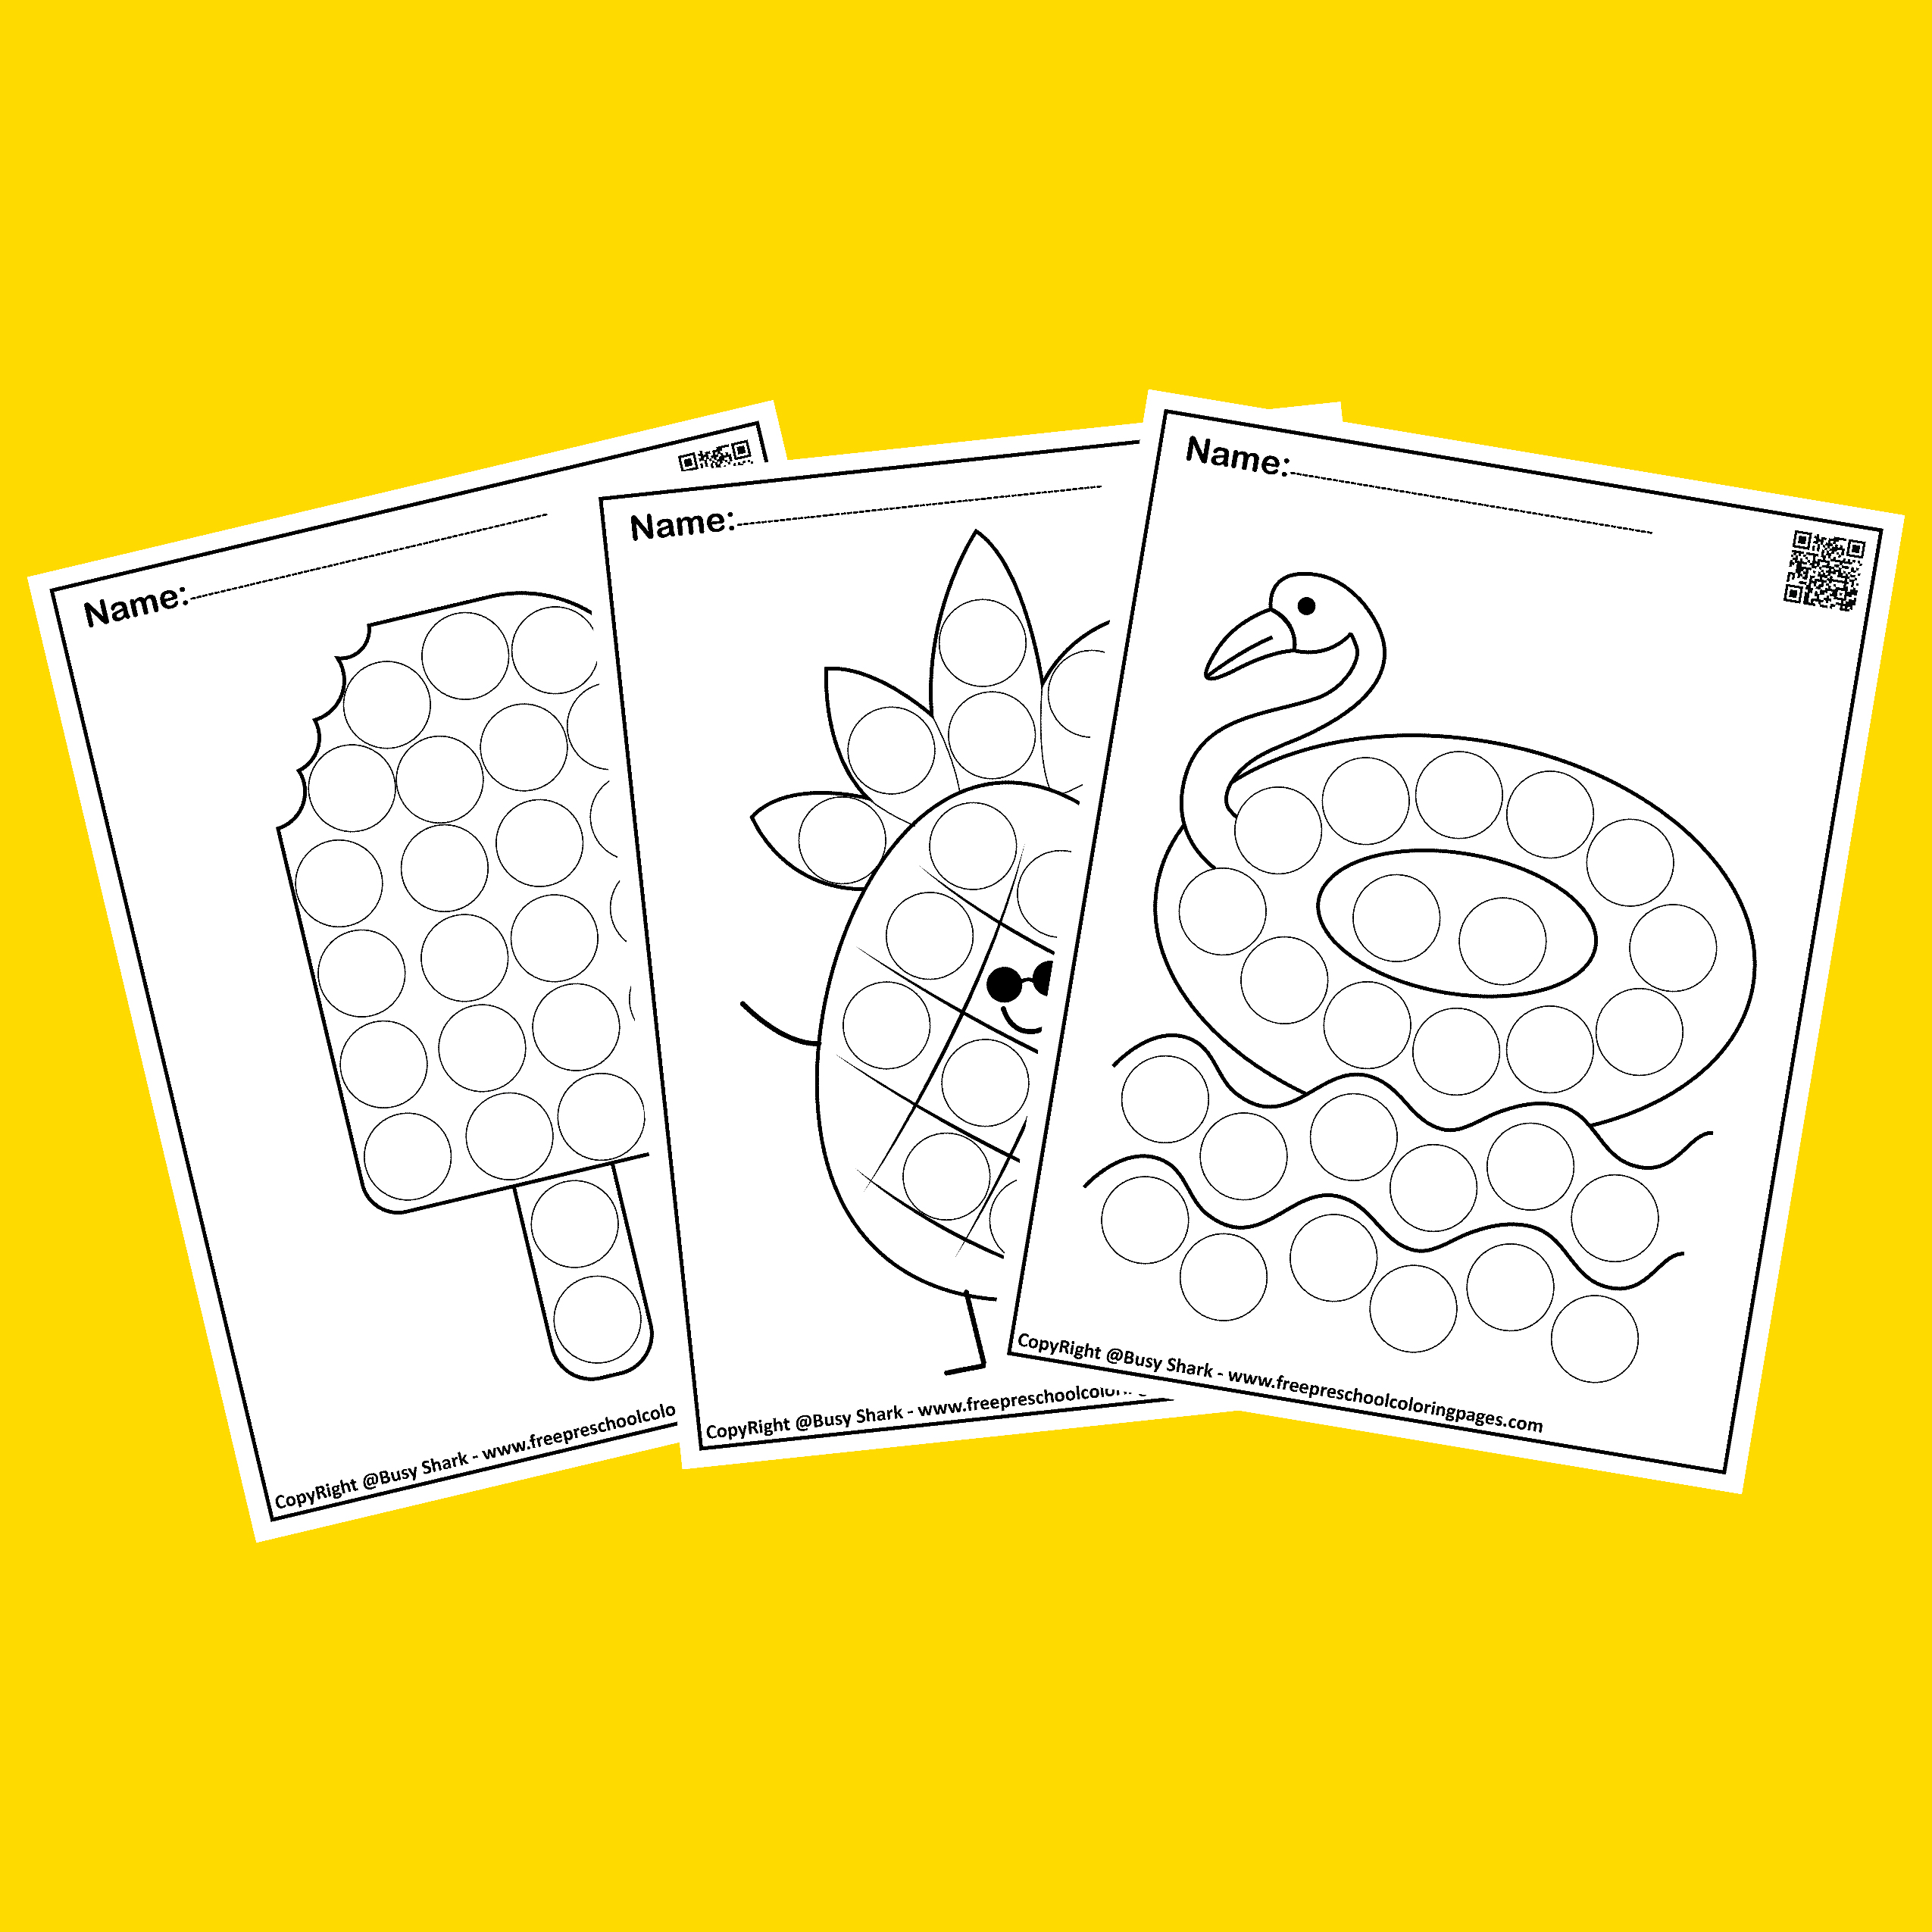 123 numbers Dot markers Activity Free coloring pages - Busy Shark